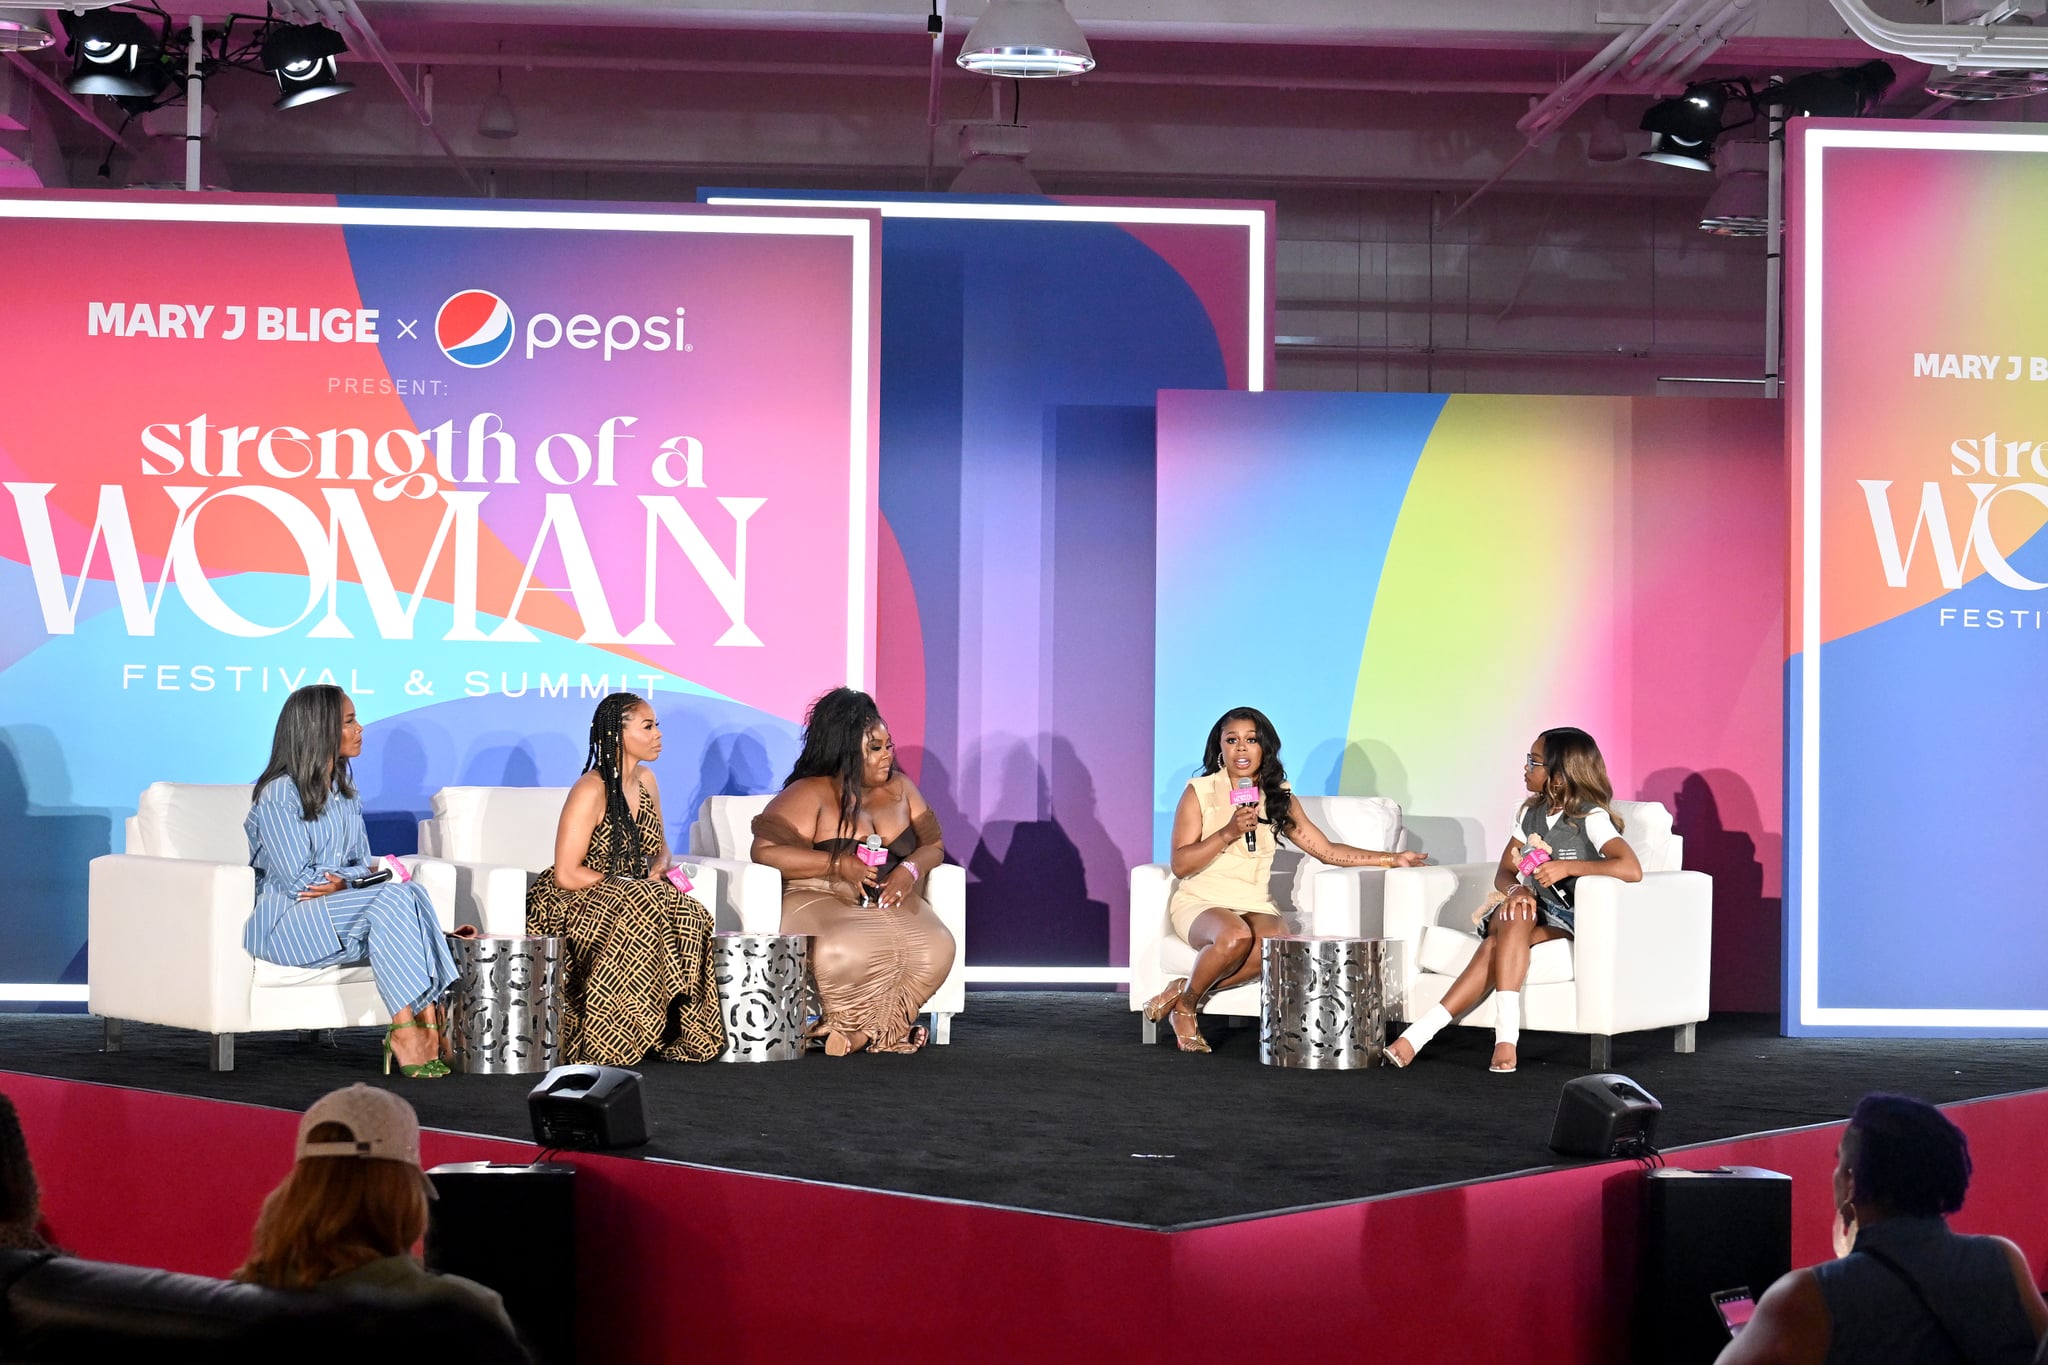 ATLANTA, GEORGIA - MAY 13: (L-R) Mara Brock Akil, Brandee Evans, Raven Goodwin, Gail Bean and Marsai Martin speak onstage during the Strength of a Woman's Summit in Partnership with Mary J. Blige, Pepsi, and Live Nation Urban at AmericasMart Atlanta on May 13, 2023 in Atlanta, Georgia. (Photo by Paras Griffin/Getty Images for Strength Of A Woman Festival & Summit)